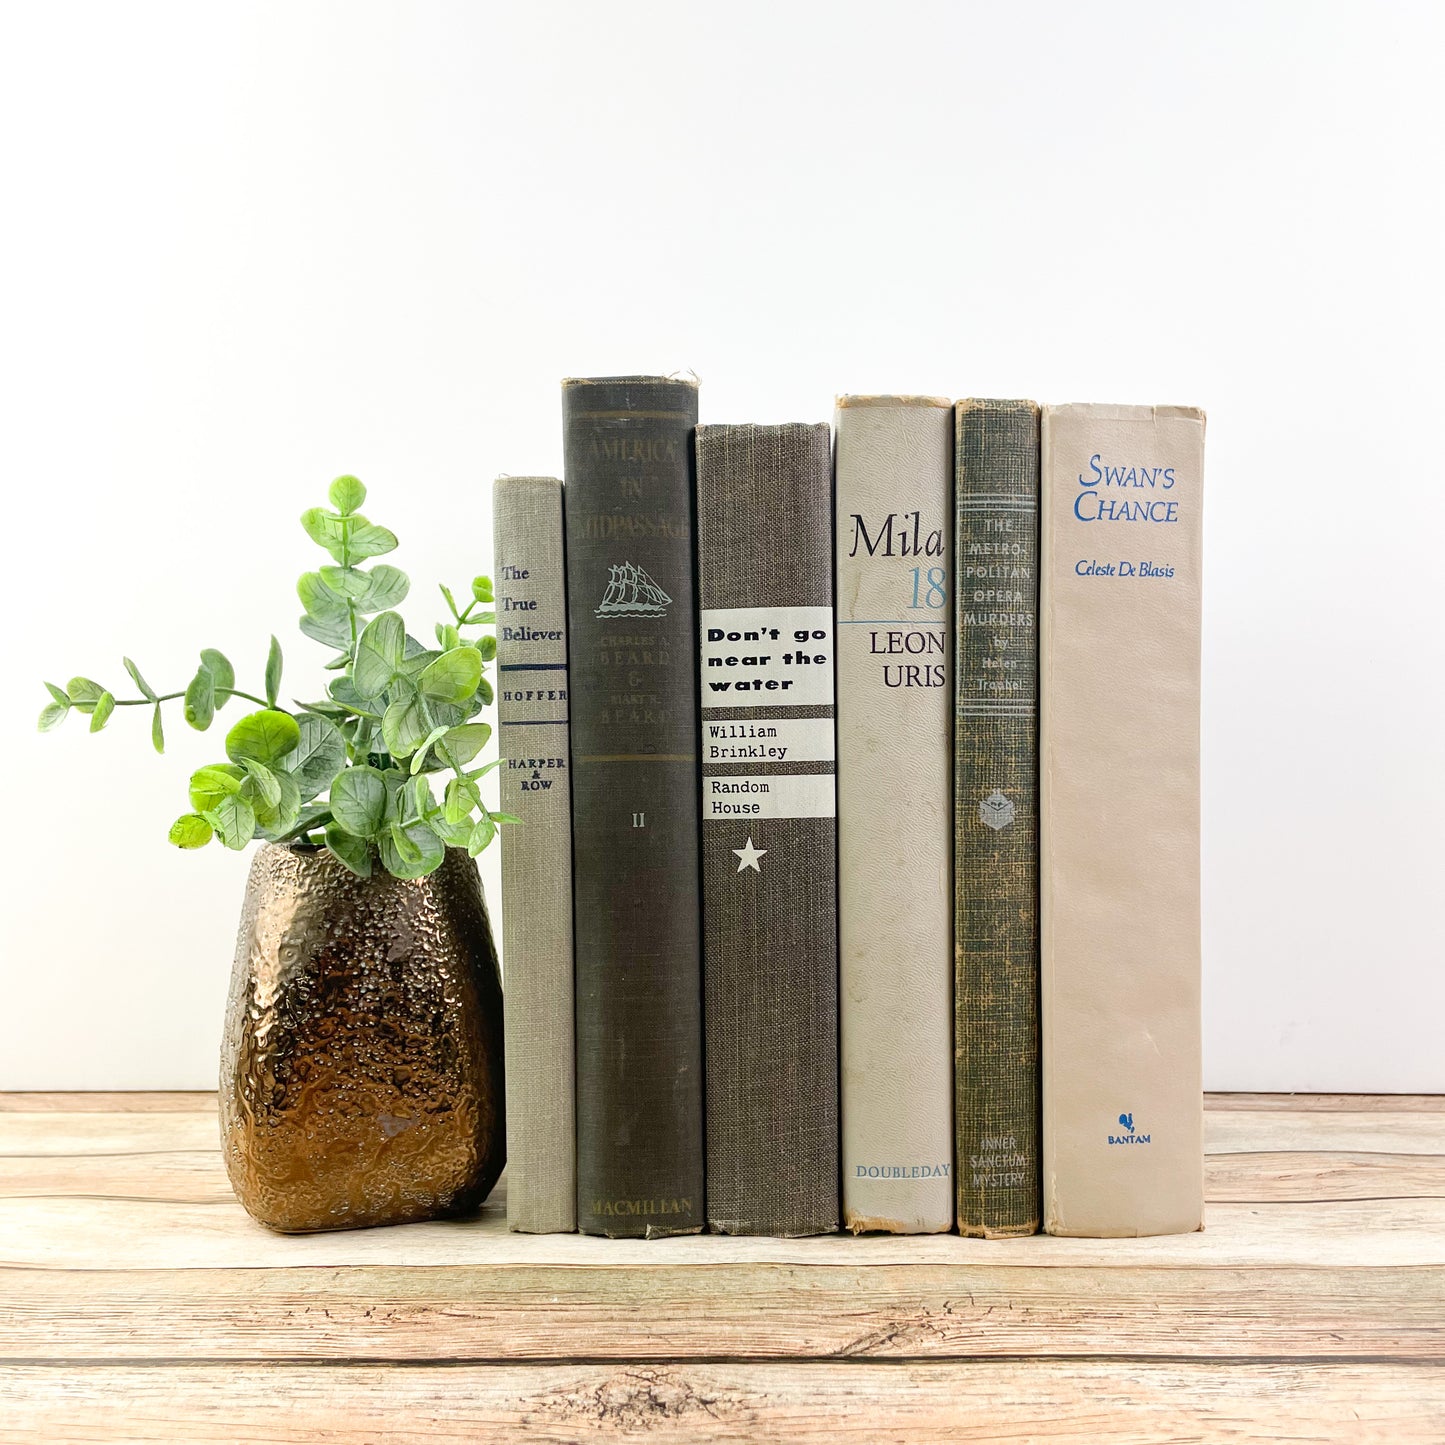 Blue, Gray and Cream Vintage Books